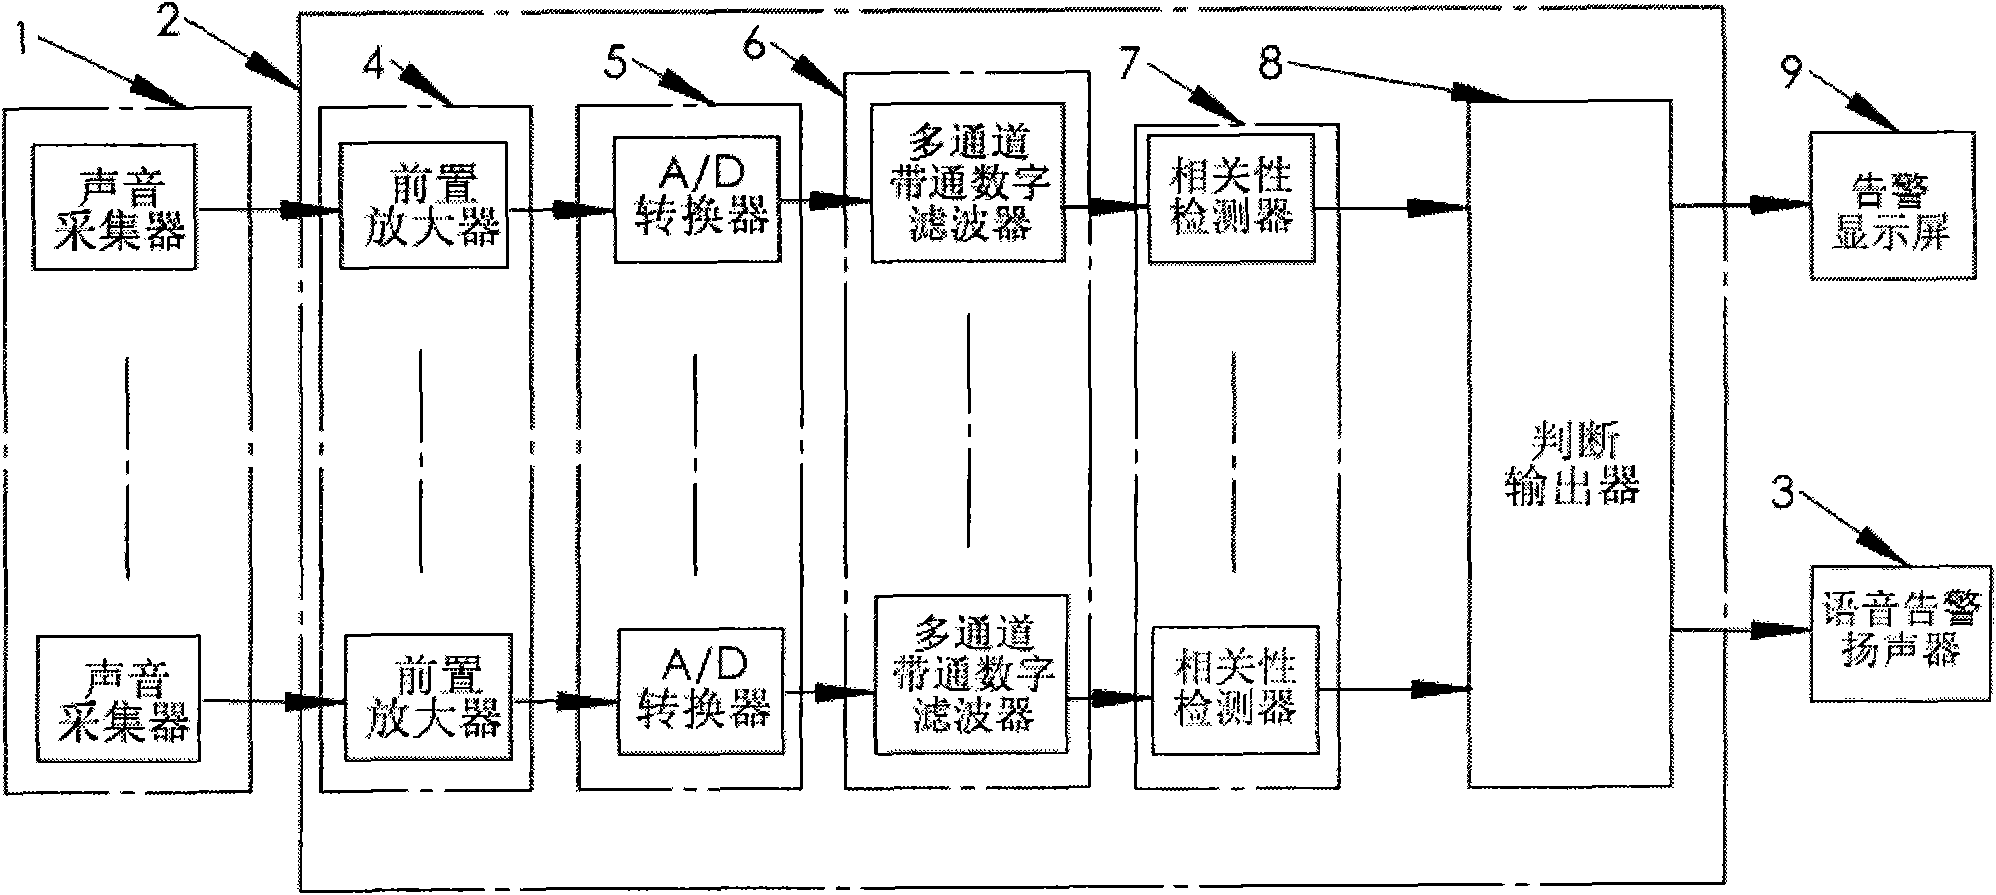 Device for monitoring alarm sound of other motor vehicles in cab of motor vehicle